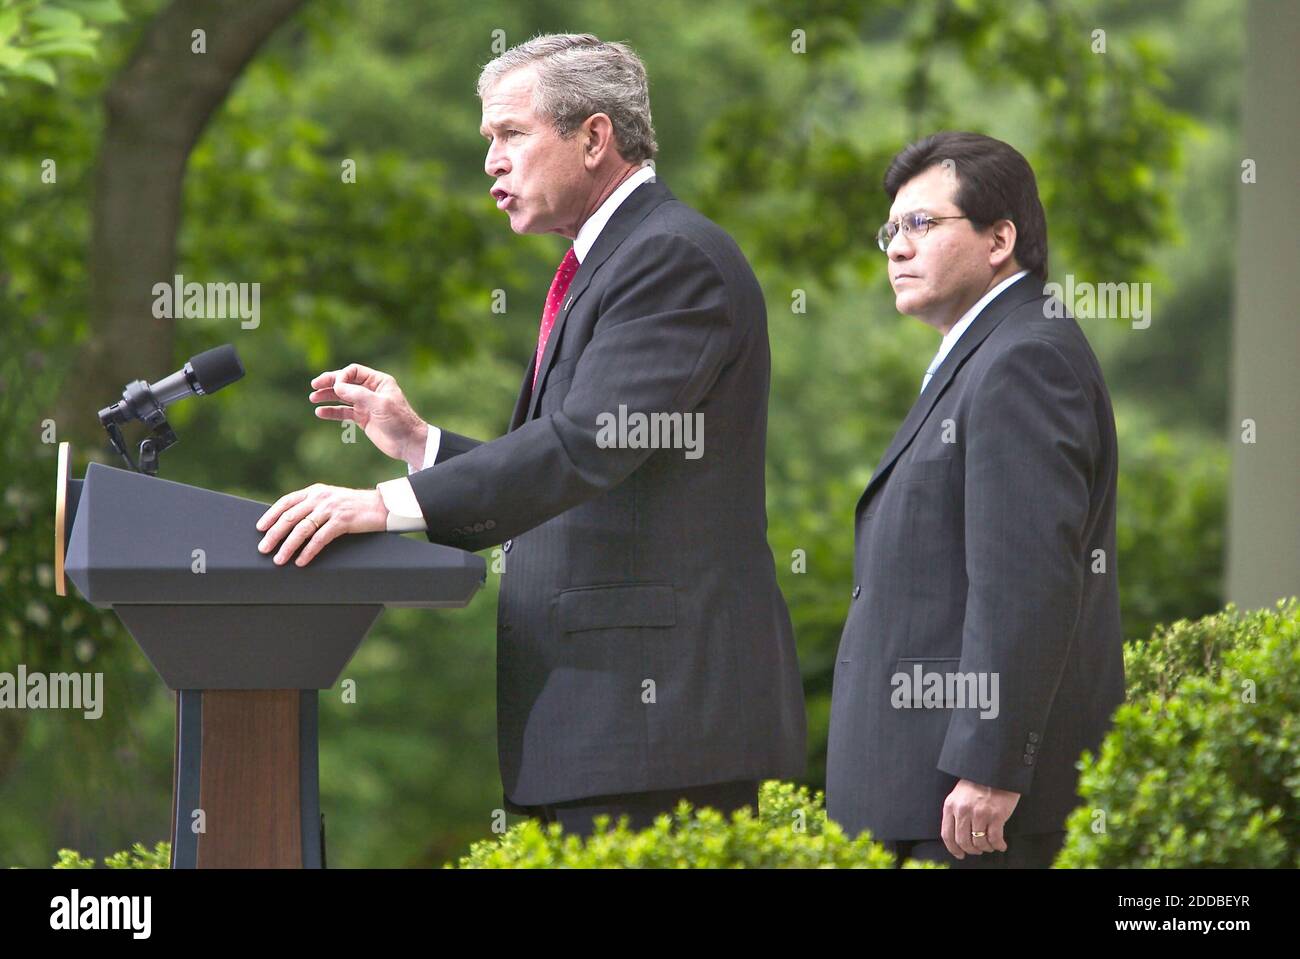 NO FILM, NO VIDEO, NO TV, NO DOCUMENTARY - U.S. President George W. Bush makes remarks on Judicial Independence and the Judicial Confirmation Process as White House Counsel Alberto Gonzales looks on from the Rose Garden at The White House in Washington, D.C. on Friday, May 9, 2003.President Bush has chosen White House counsel Alberto Gonzales, a Texas confidant and the most prominent Hispanic in the administration, to succeed Attorney General John Ashcroft. November 10, 2004. Photo by Chuck Kennedy/KRT/ABACA. Stock Photo